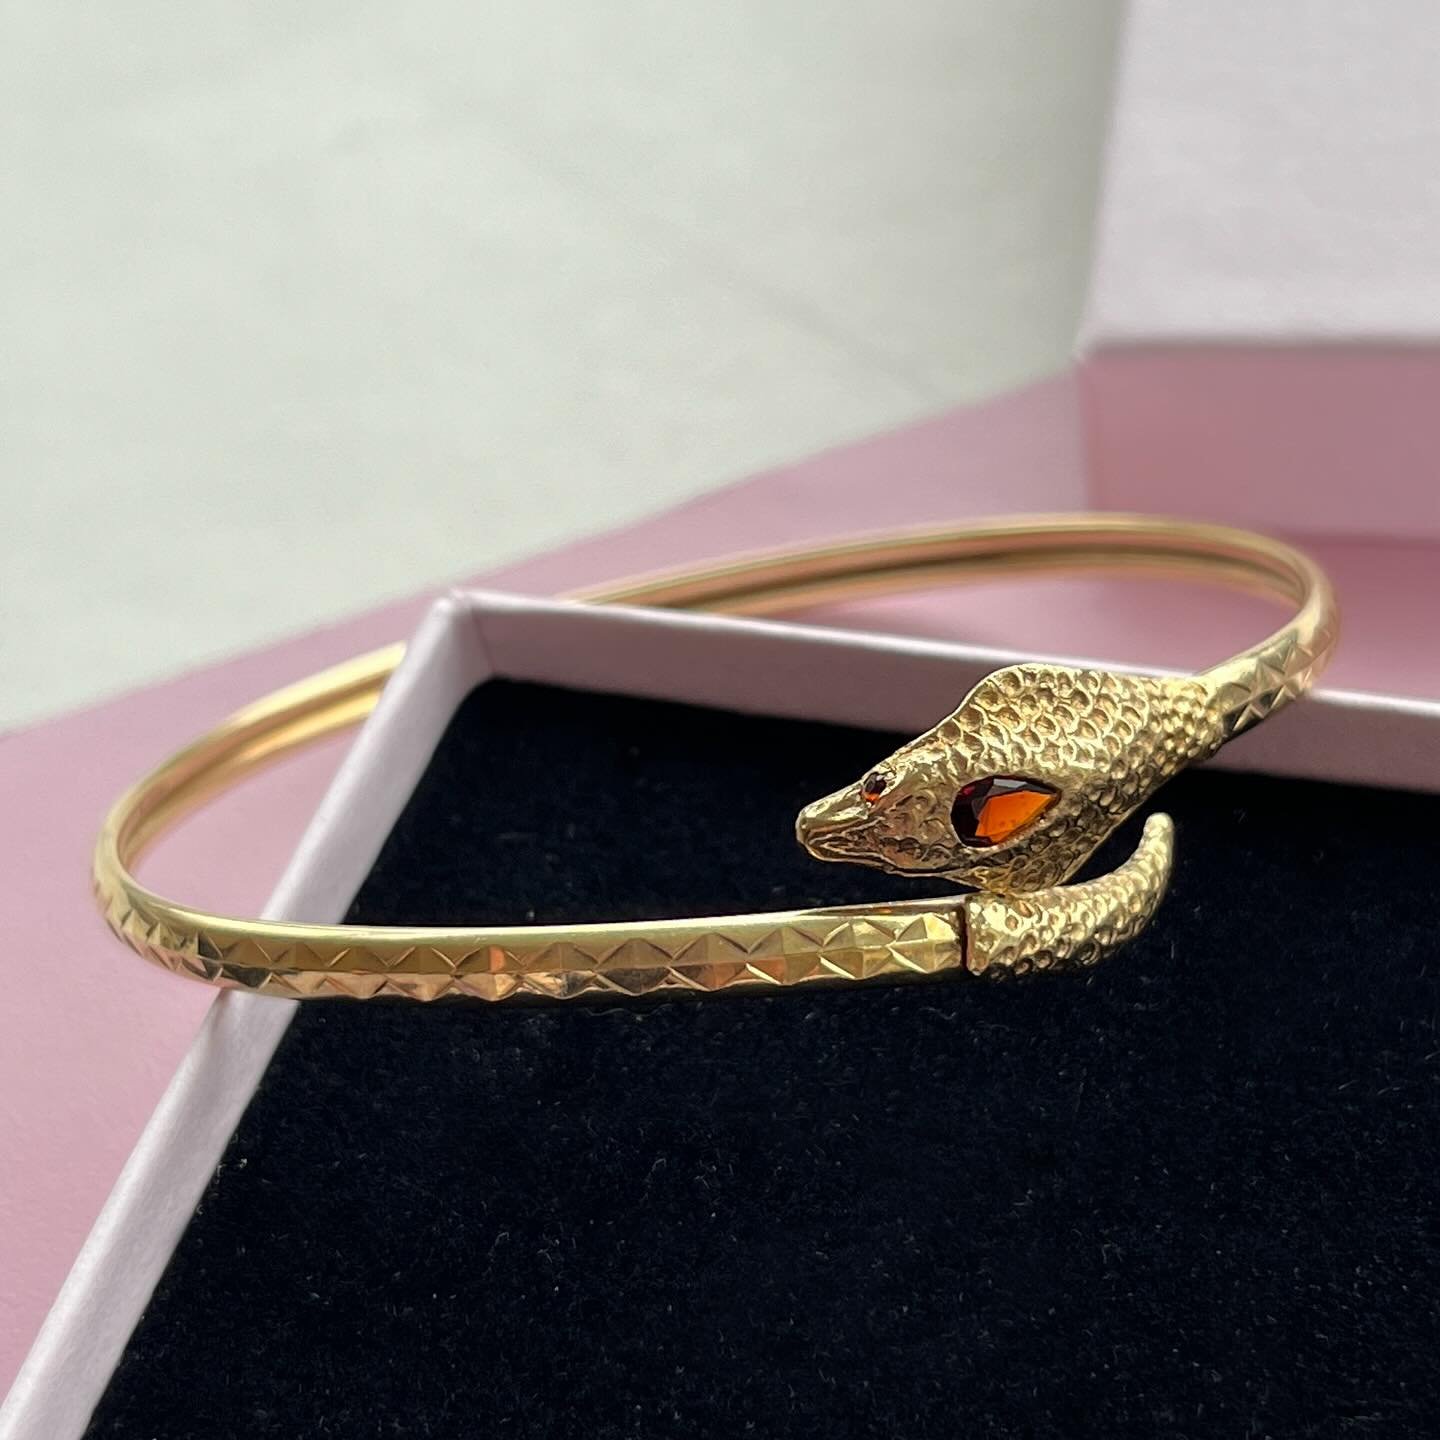 Snakealicious 🐍 Vintage 9ct gold and garnet snake bangle now available on my Etsy #linkinbio
.
.
#snakebangle #garnetsnakebangle #goldsnakebangle #vintagesnakebangle #ilovesnakejewelry #snakejewelry #snakesofinstagram #vintagesnakecuff #goldsnakecuf